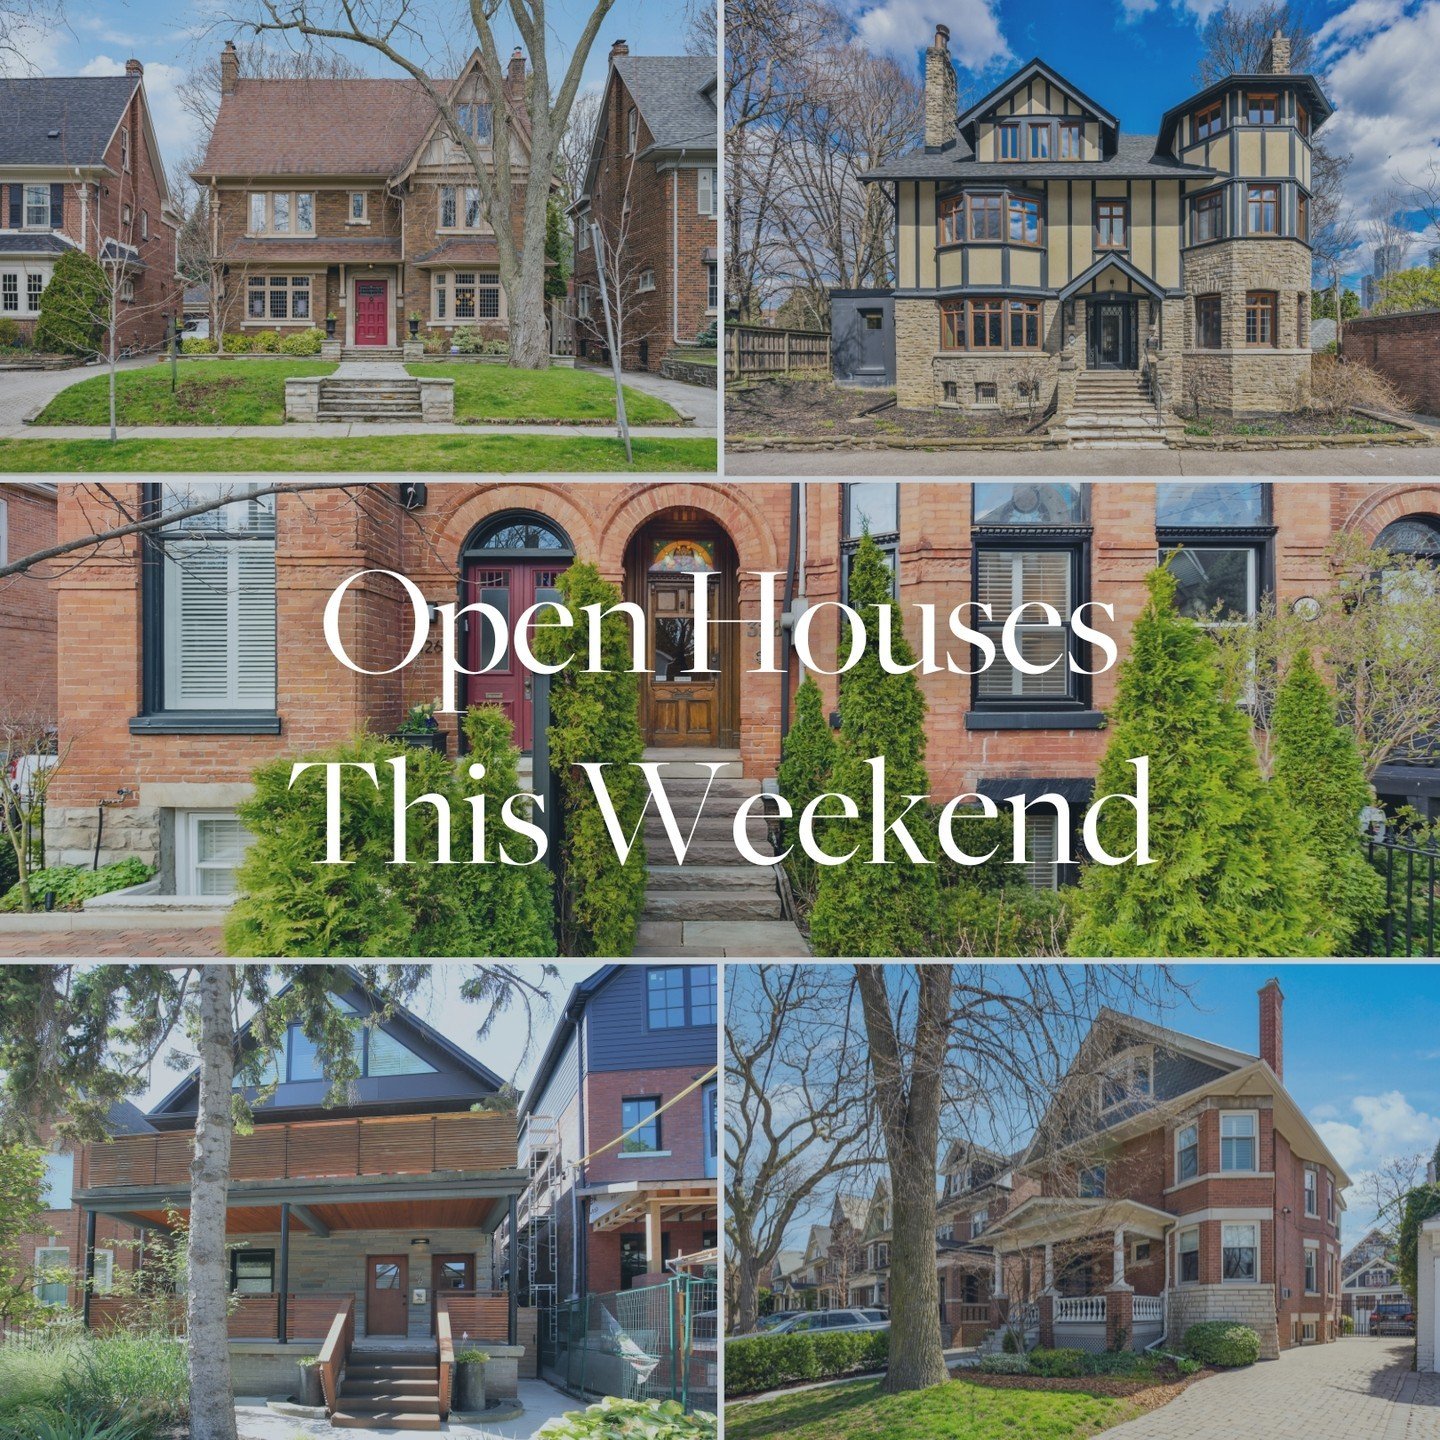 Please join us this weekend at FIVE of our #OpenHouses! There's something for everyone, from #PlayterEstates to #TheAnnex to #TrinityBellwoods.

Come take a look at these spectacular properties this weekend.

Each #OpenHouse is 📅 Saturday &amp; Sund